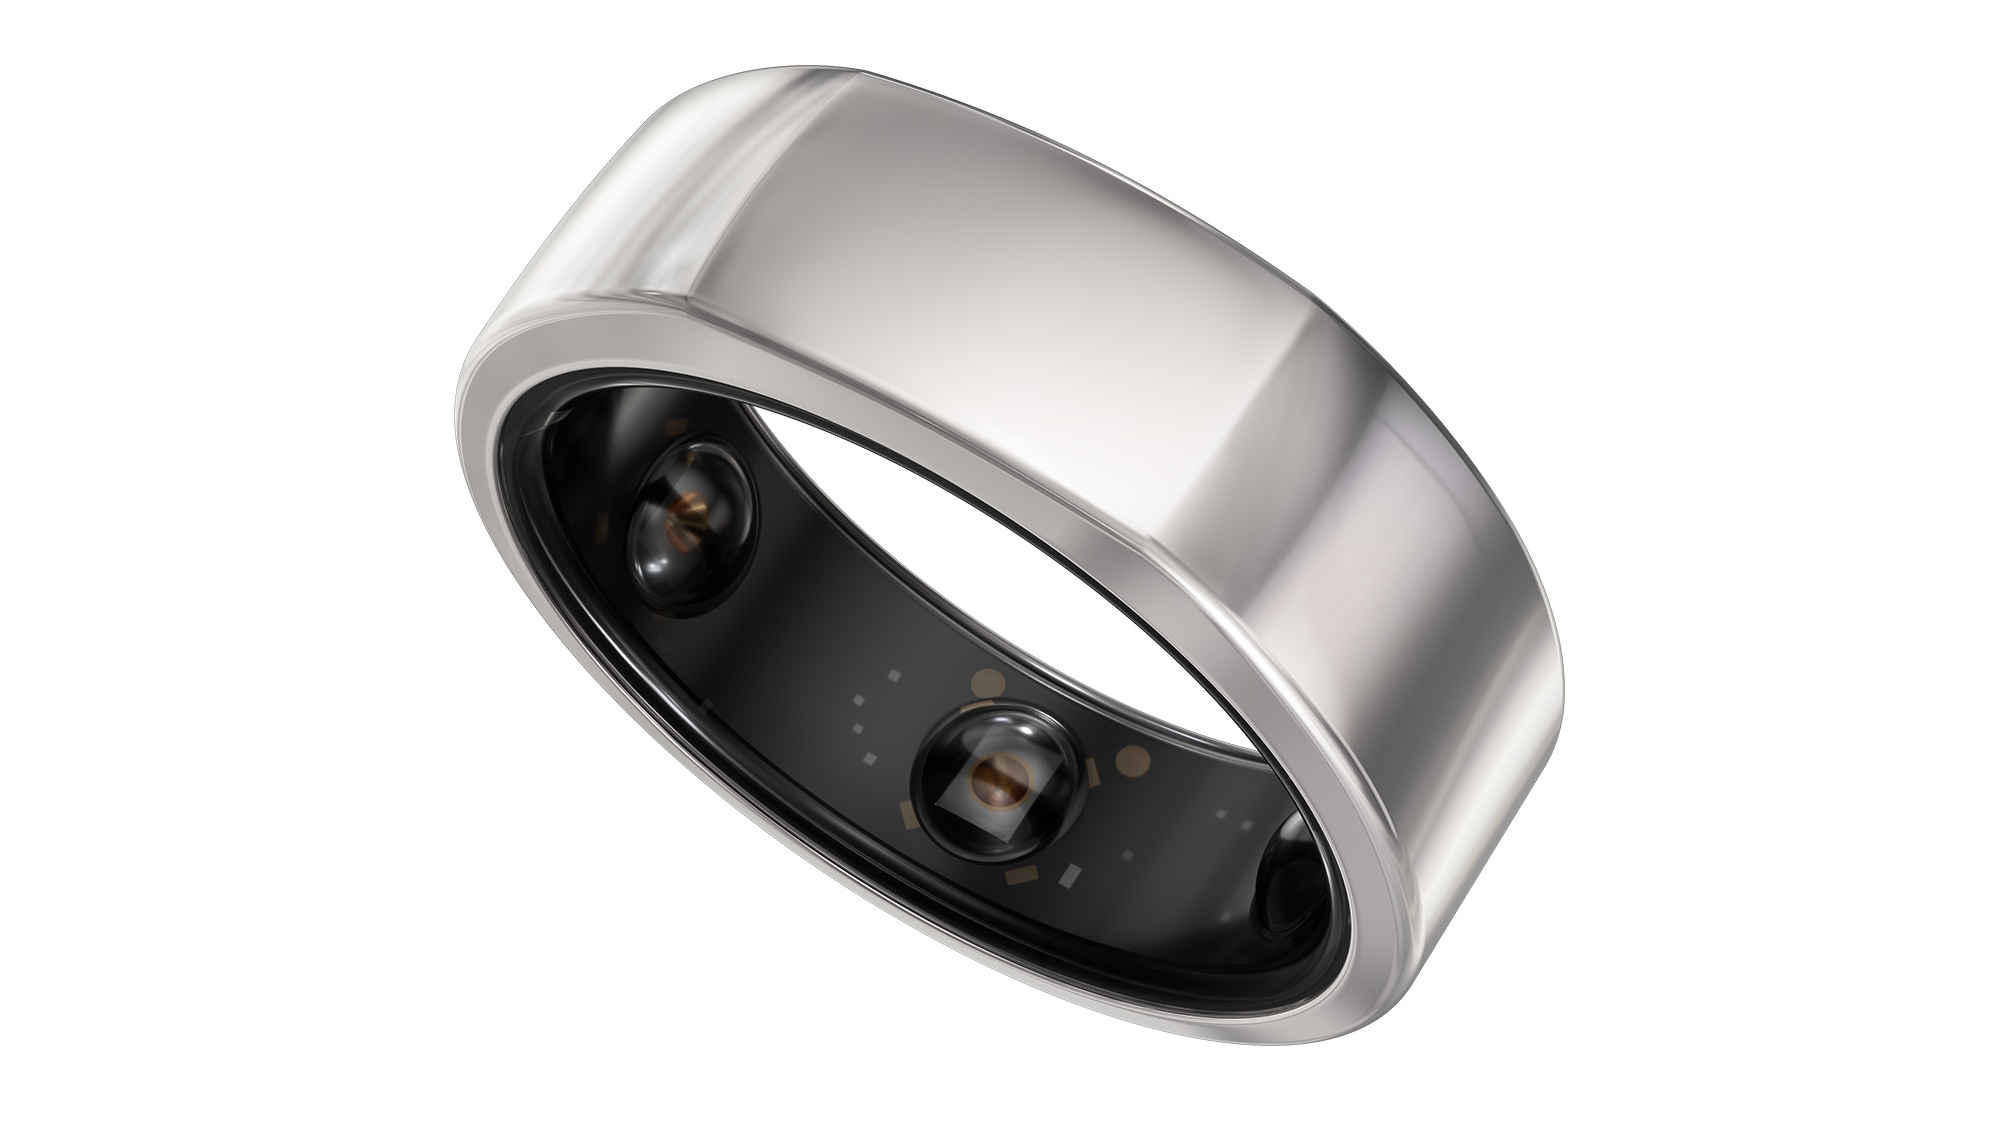 I love the Oura Ring, but I'm worried about its future